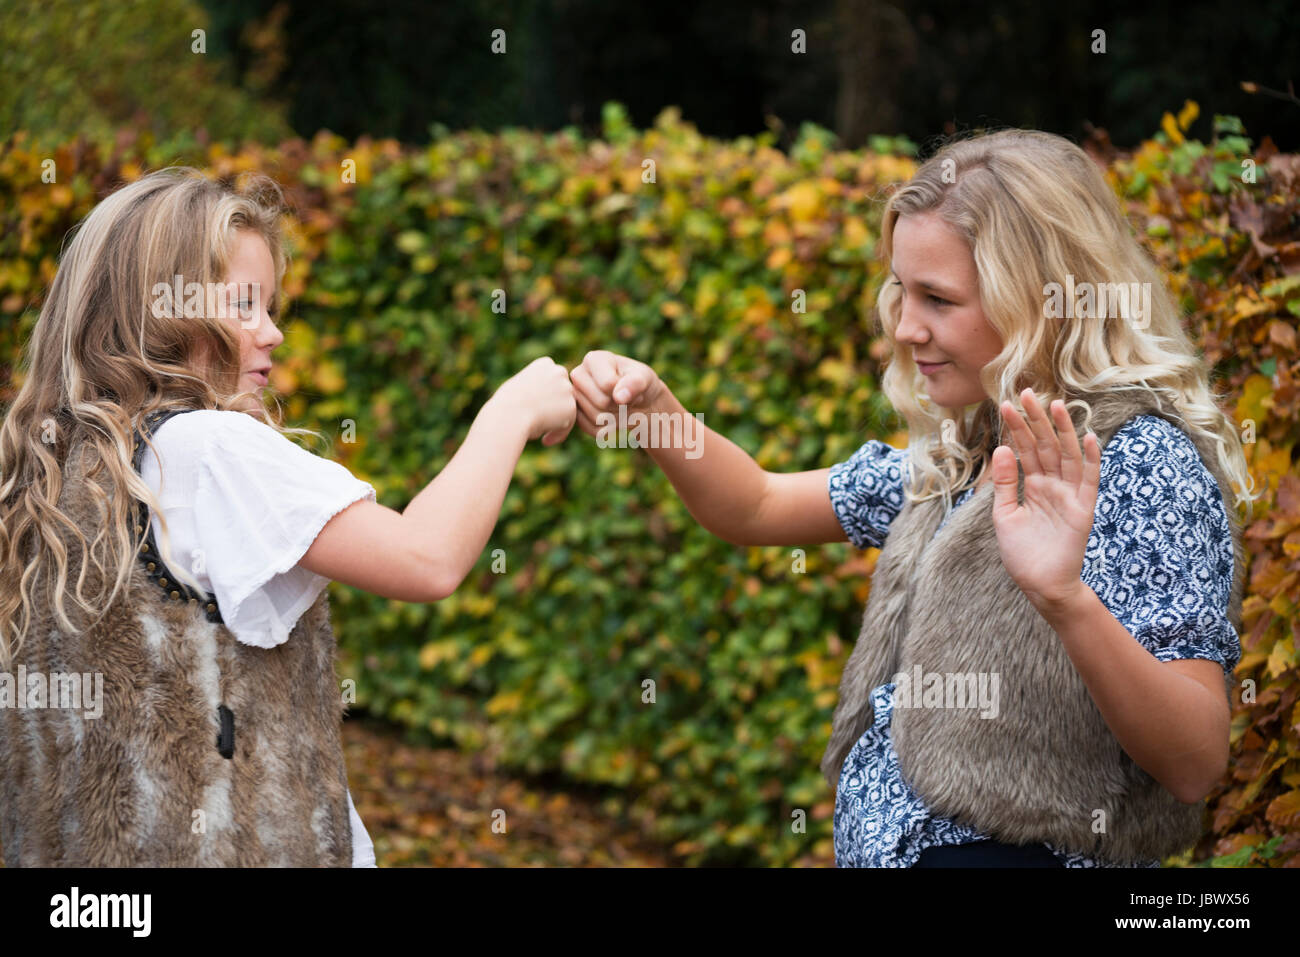 Two sisters doing fist bumps by garden hedge Stock Photo